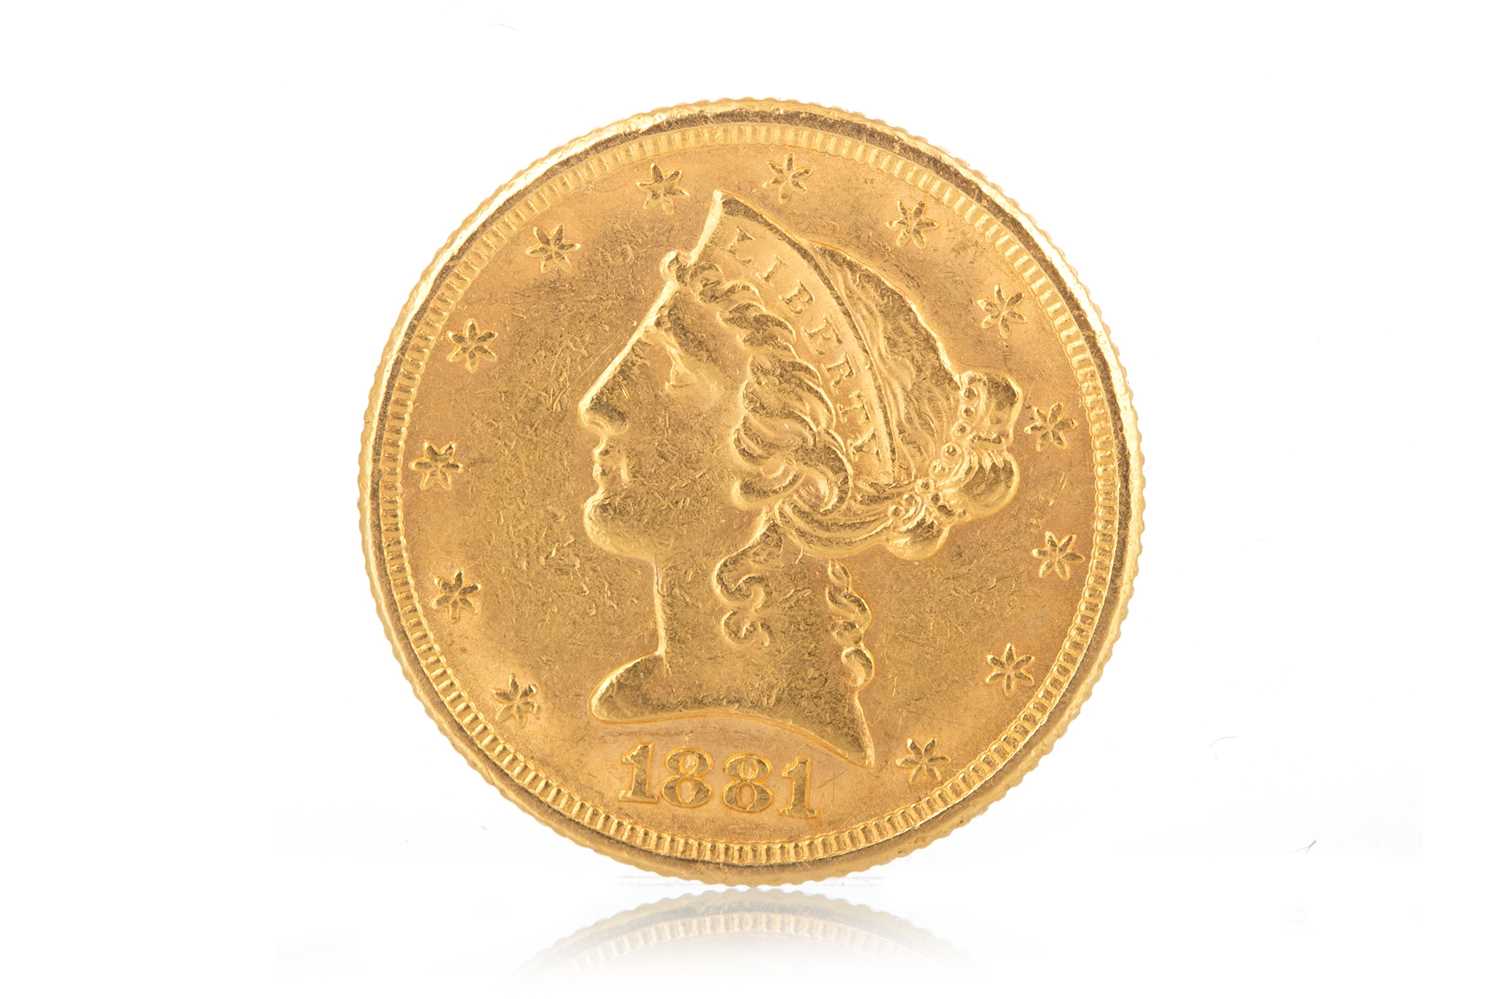 AMERICAN LIBERTY HEAD GOLD FIVE DOLLAR COIN - Image 2 of 2